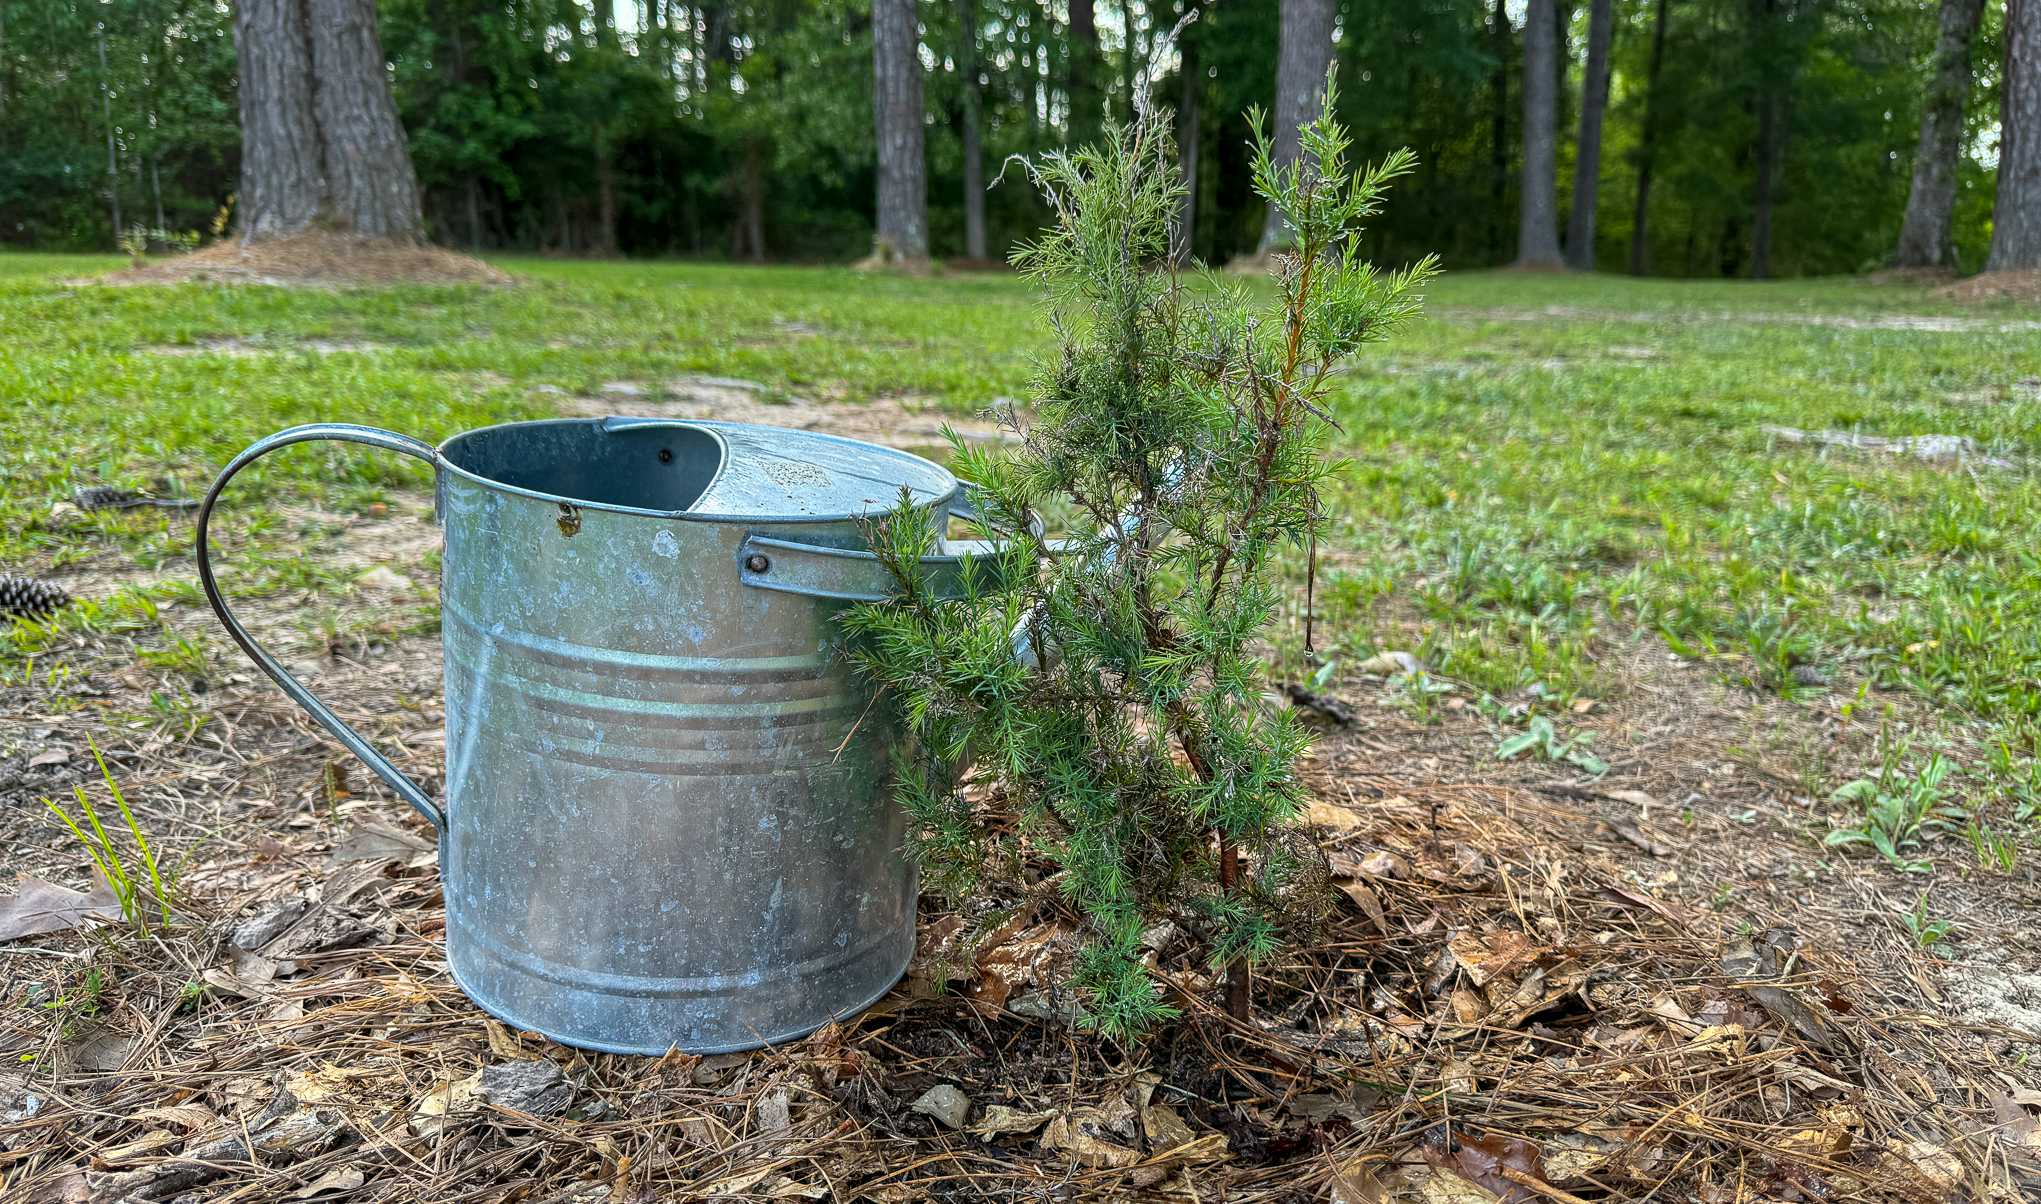 A small, spiky cedar tree sapling sticks out of the ground next to a metal watering can